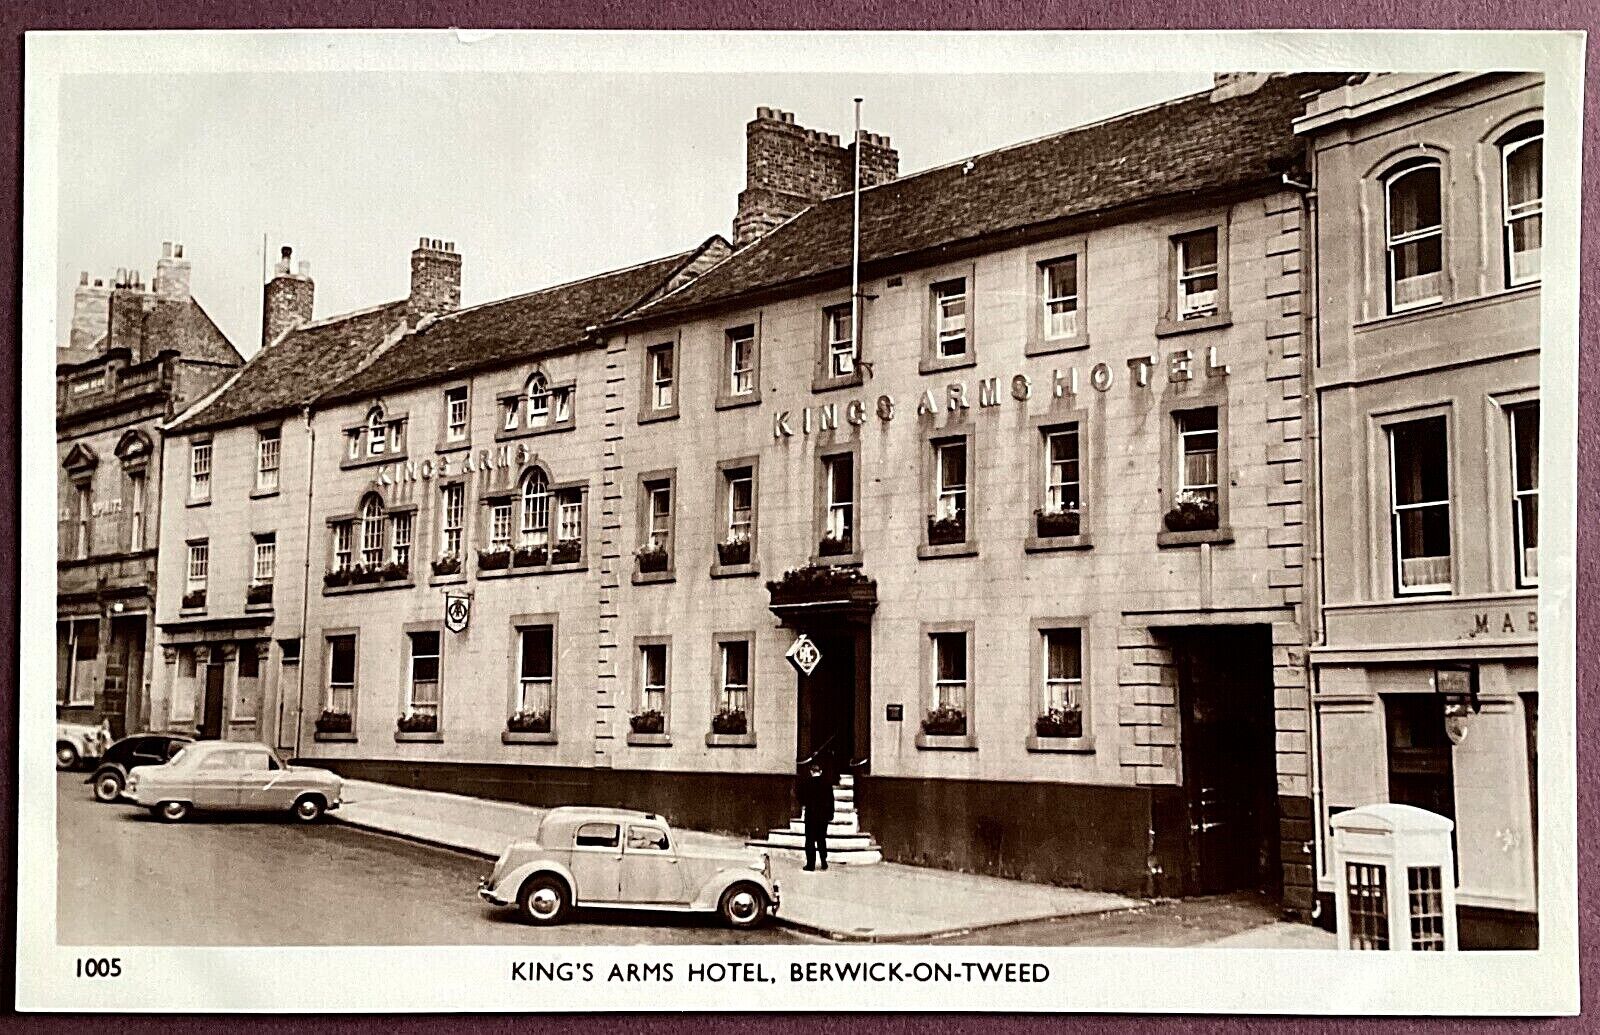 House Clearance - REAL PHOTO POSTCARD - KING'S ARMS HOTEL, BERWICK-ON-TWEED, NORTHUMBERLAND